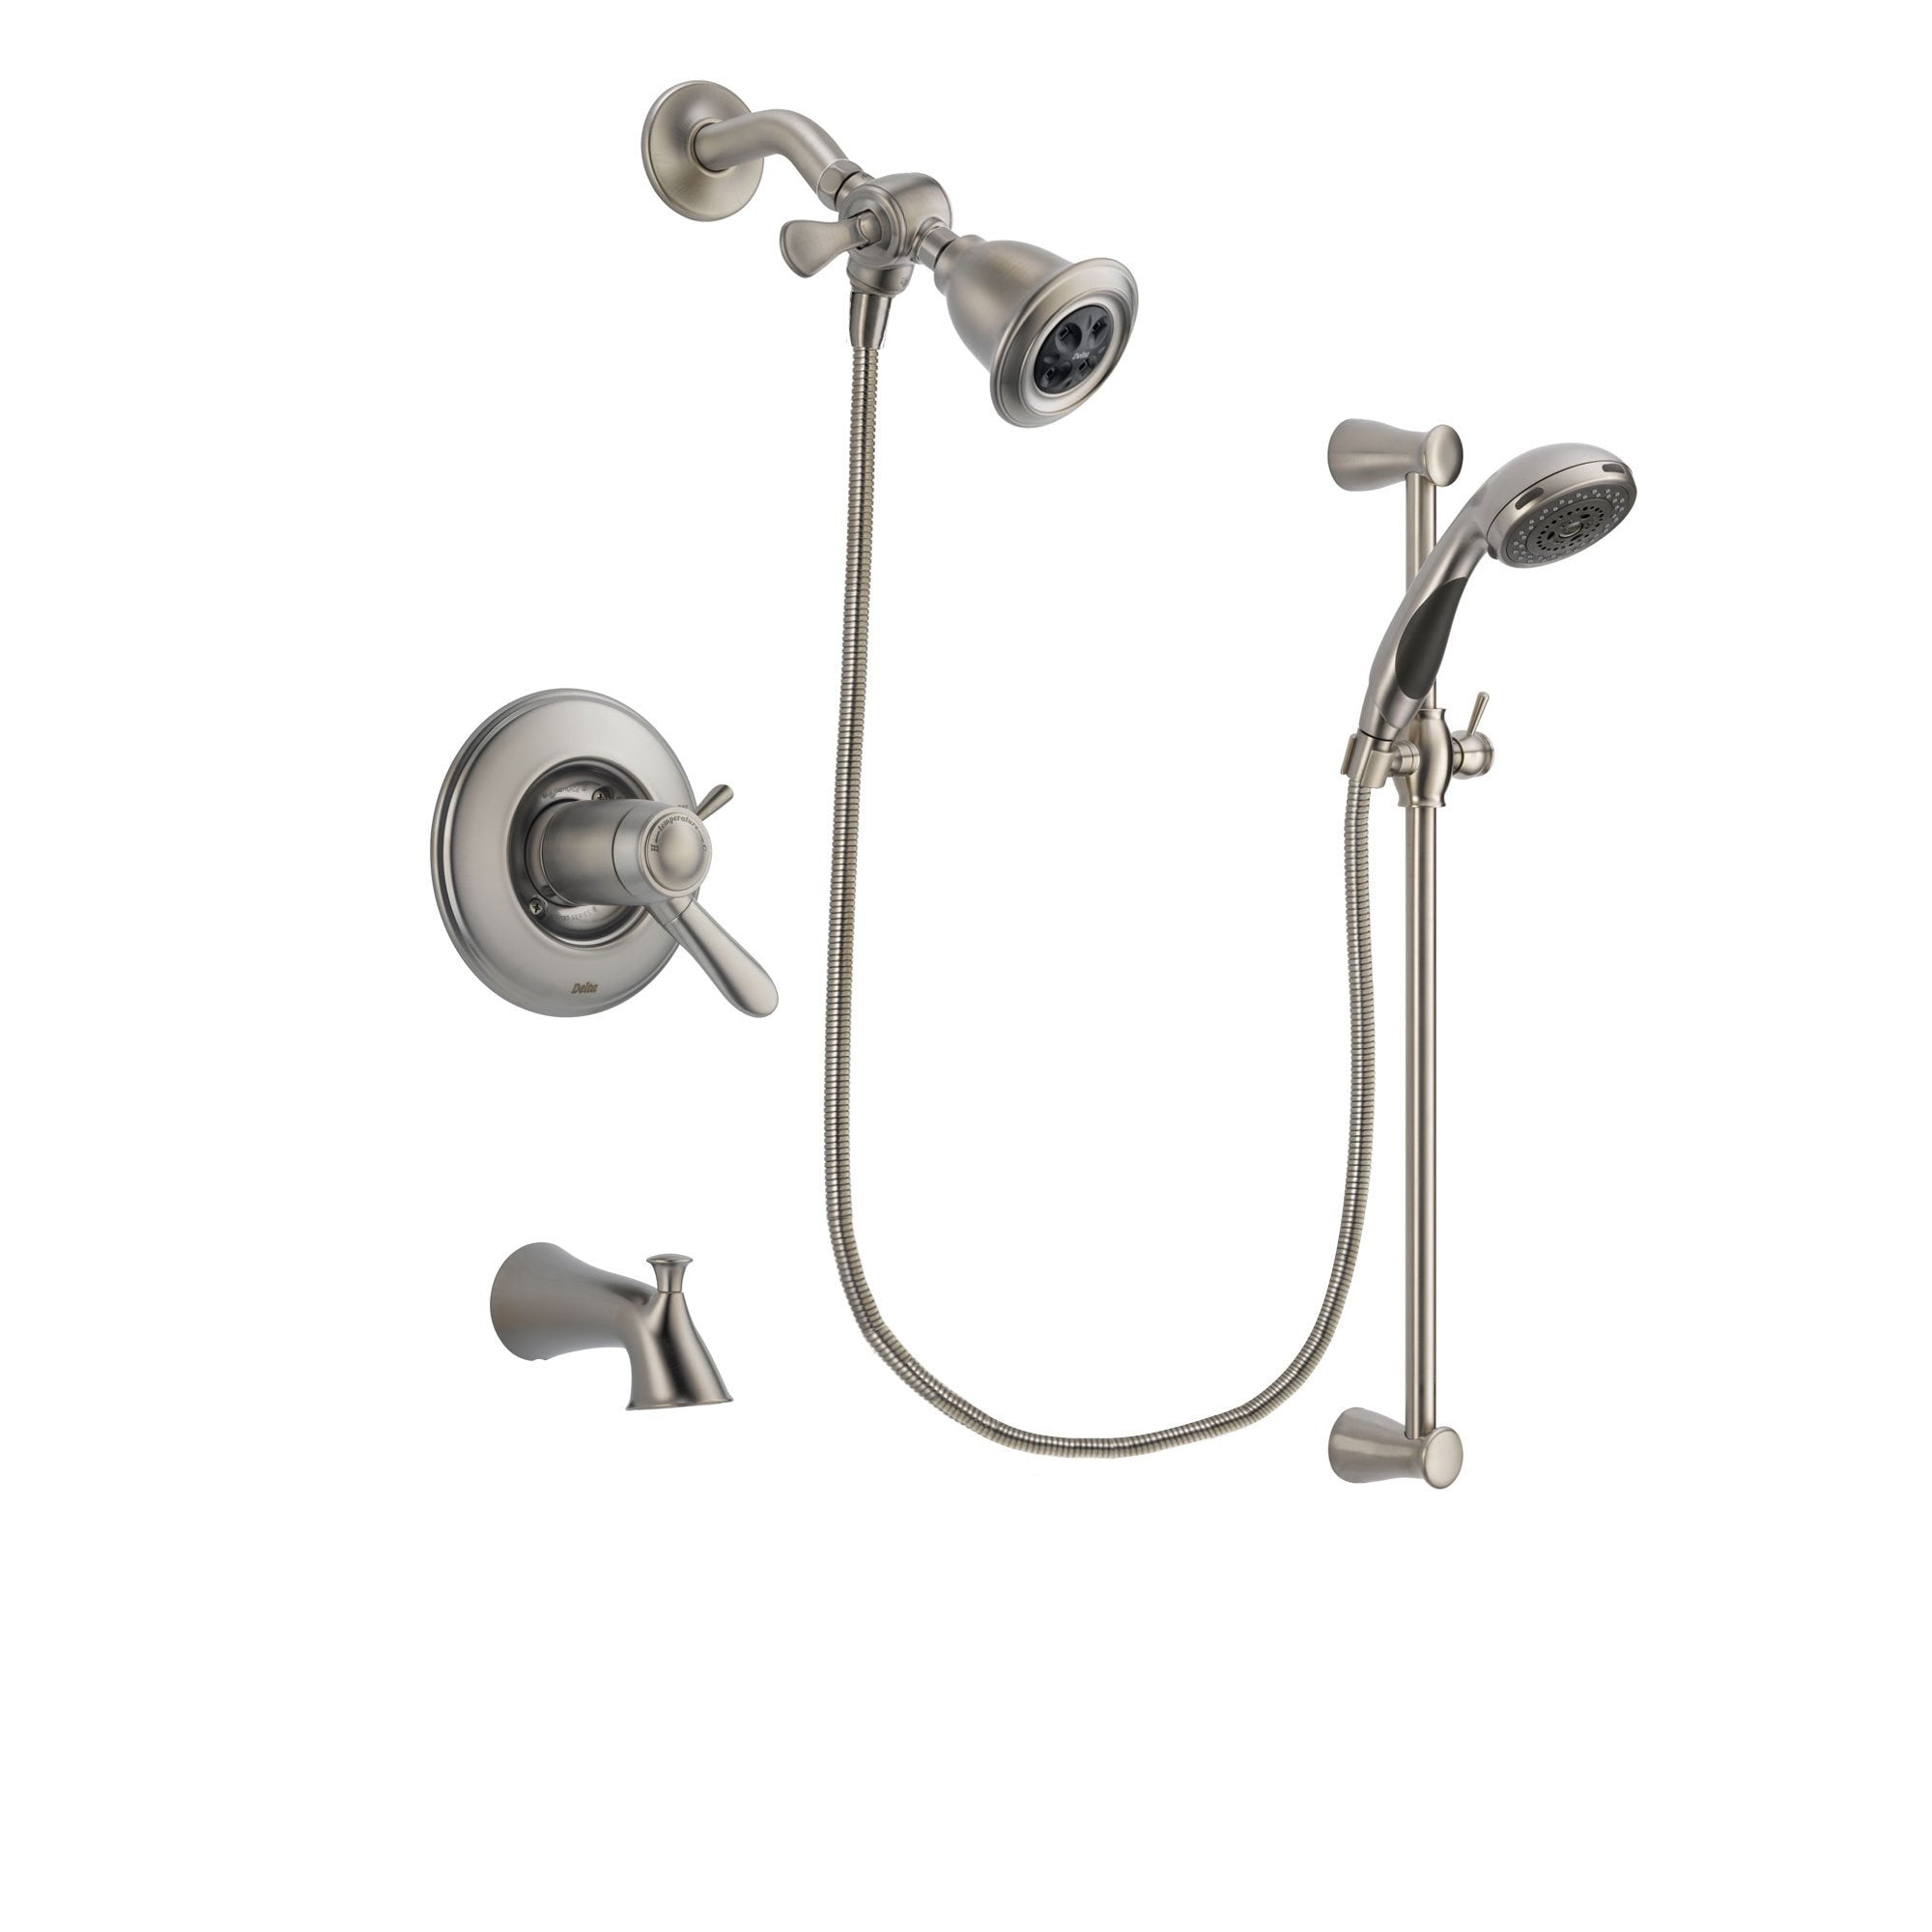 Delta Lahara Stainless Steel Finish Thermostatic Tub and Shower Faucet System Package with Water Efficient Showerhead and Handheld Shower Spray with Slide Bar Includes Rough-in Valve and Tub Spout DSP1547V